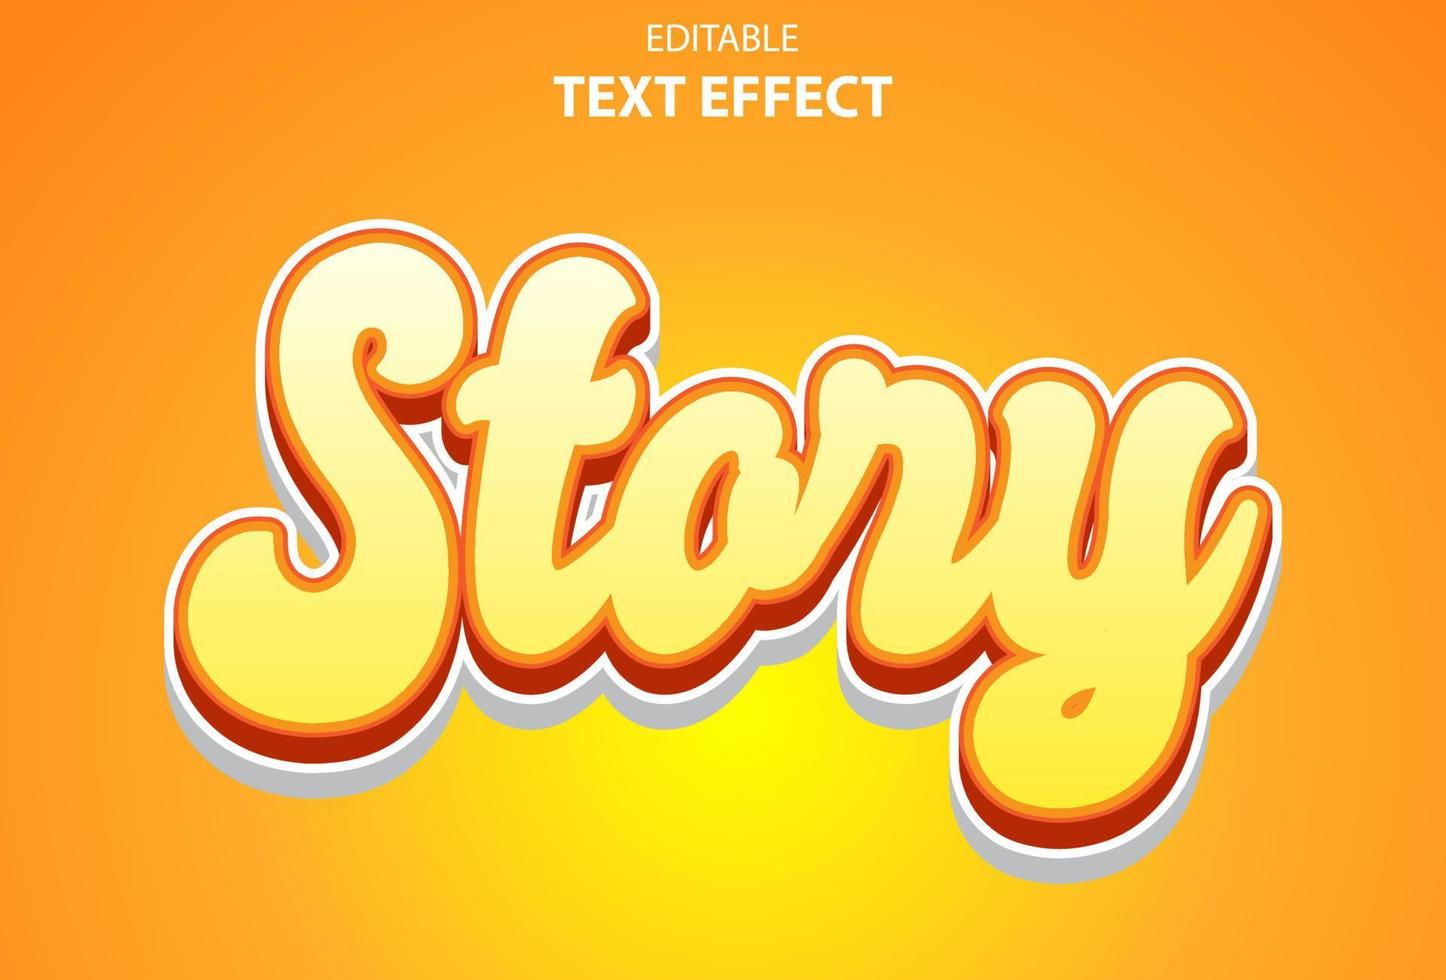 story text effect with orange color 3d style for template. vector